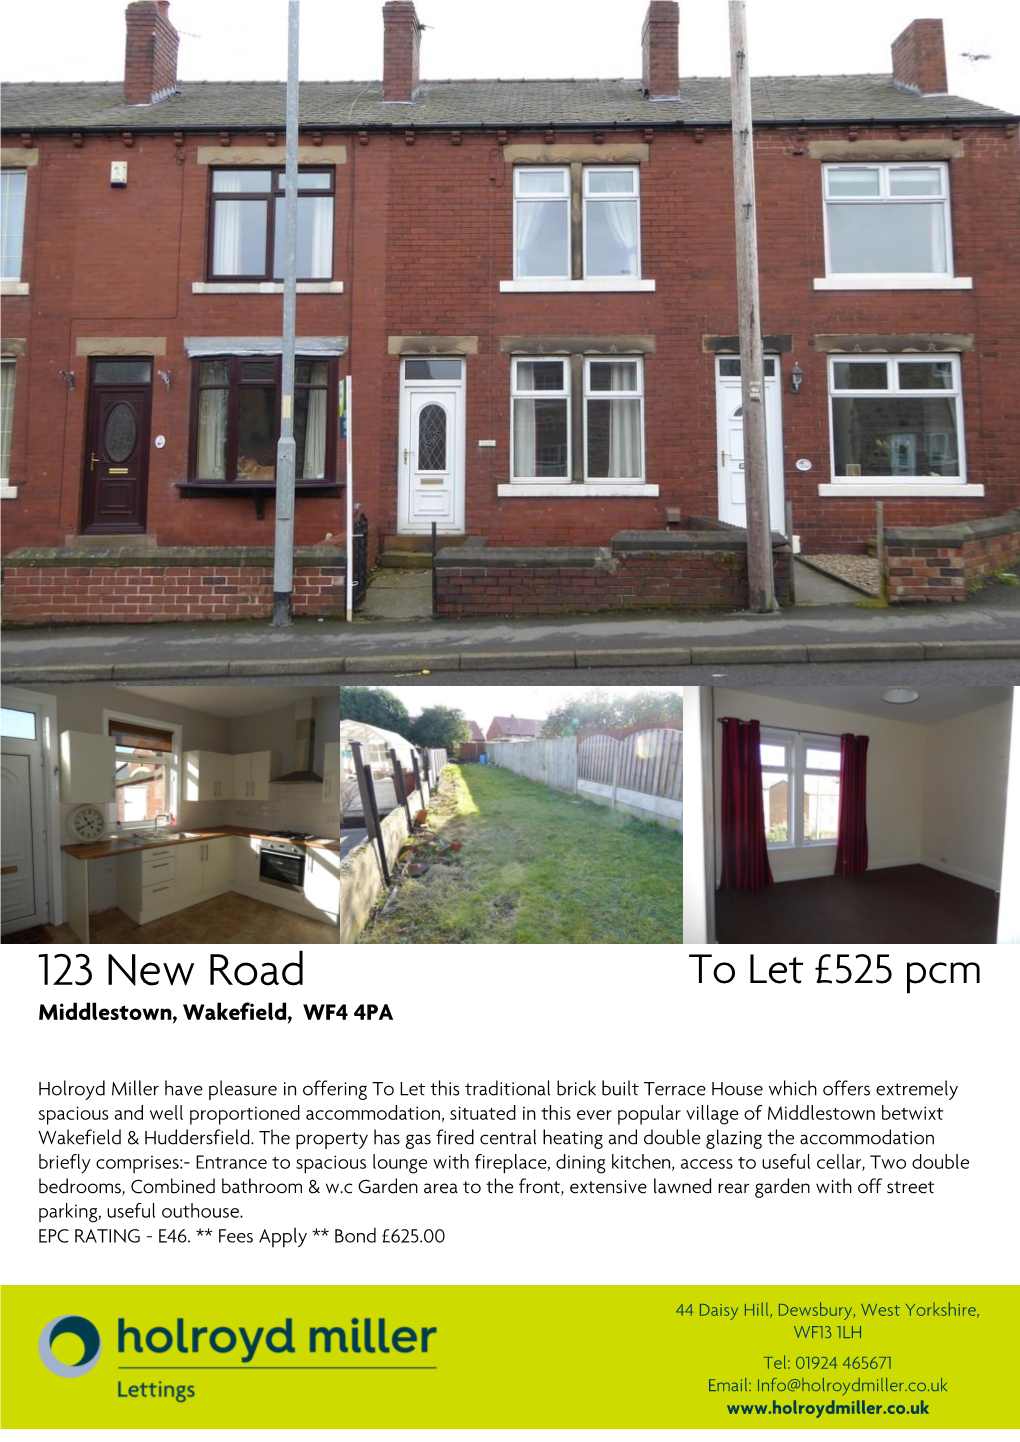 123 New Road to Let £525 Pcm Middlestown, Wakefield, WF4 4PA